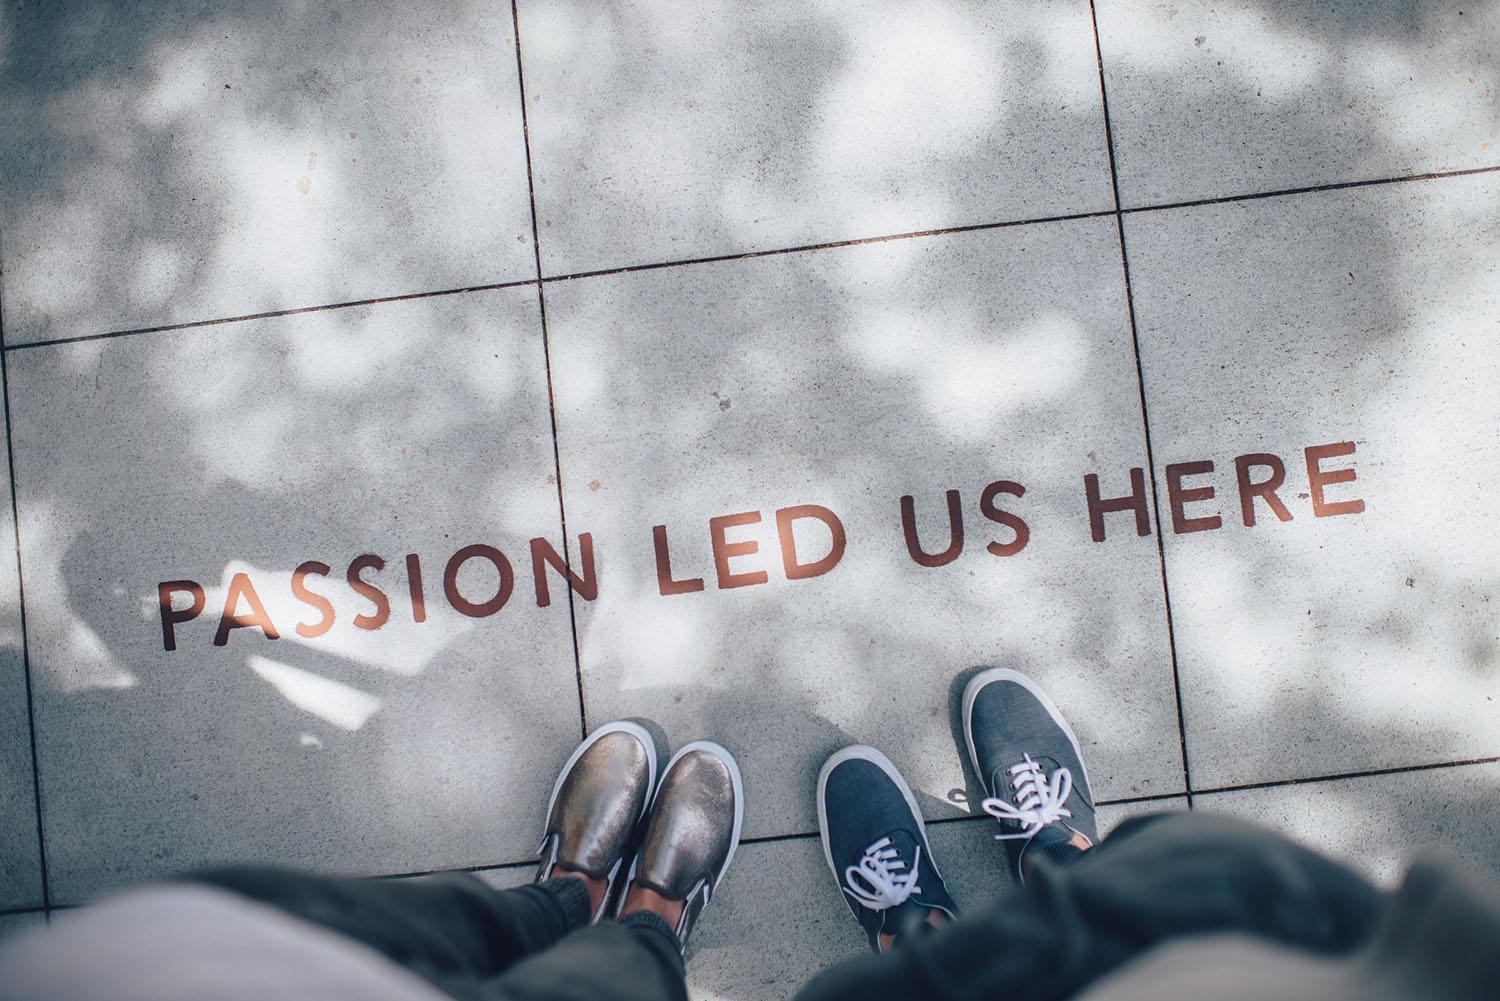 Passion led us here written on the floor